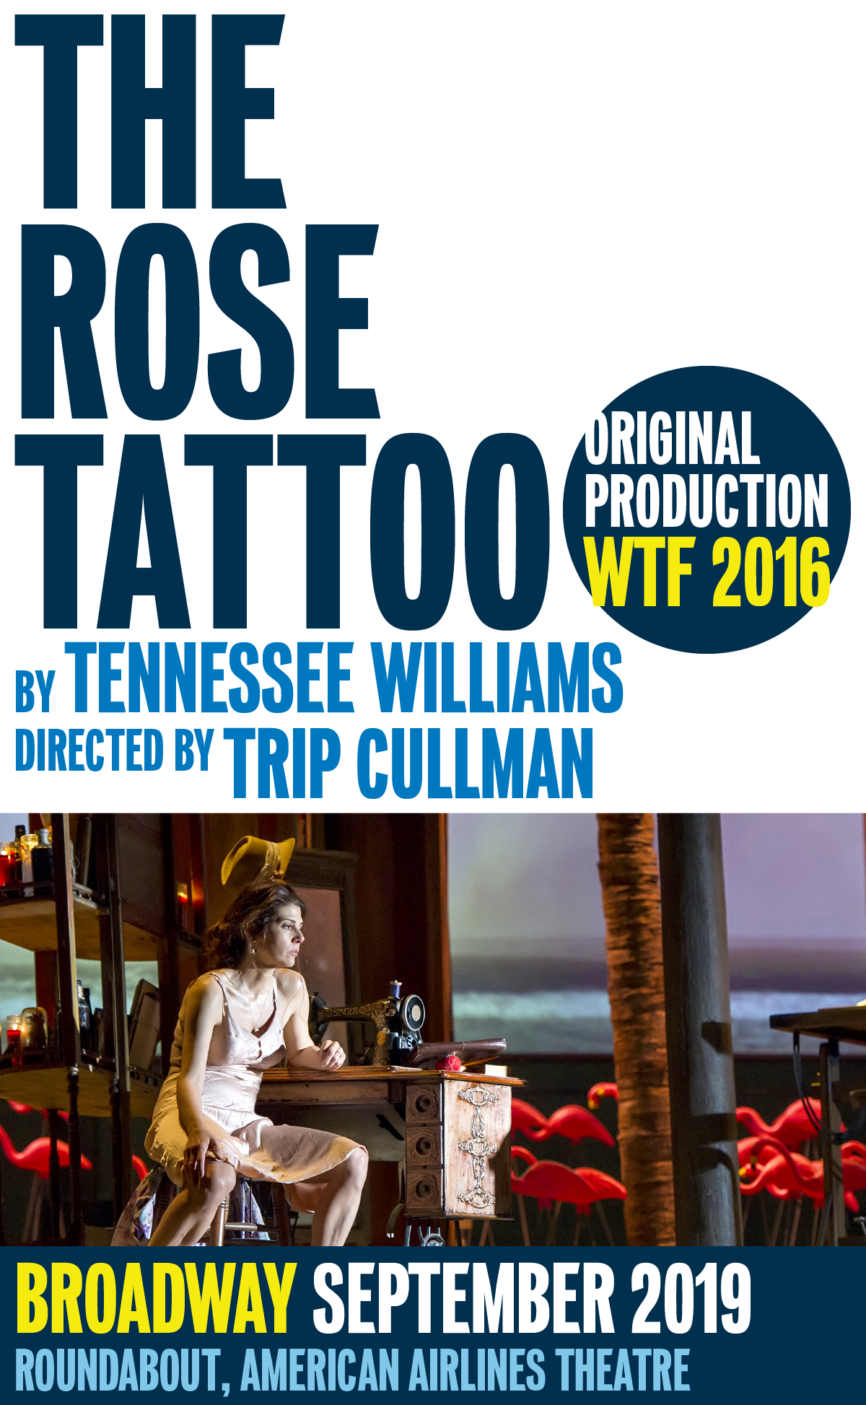 The Rose Tattoo, by Tennessee Williams, directed by Trip Cullman, Original Production at WTF in 2016, On Broadway in September 2019, Roundabout, American Airlines Theatre